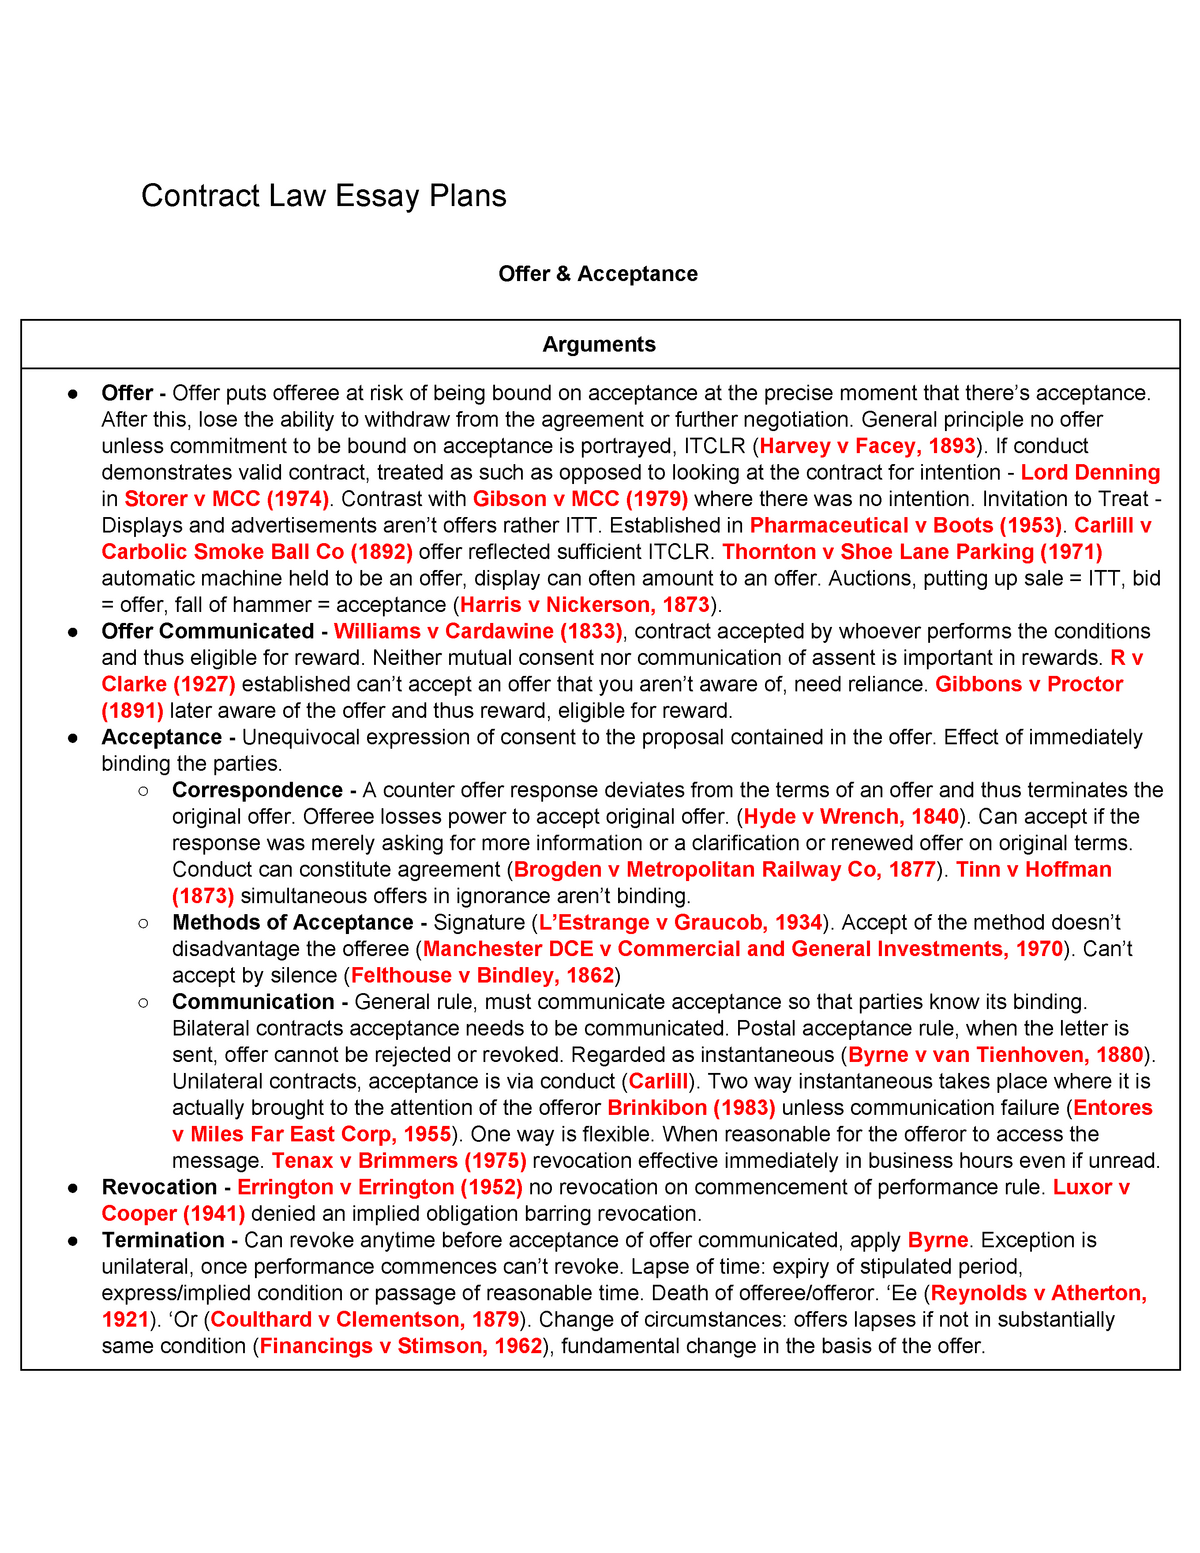 example of contract law essay